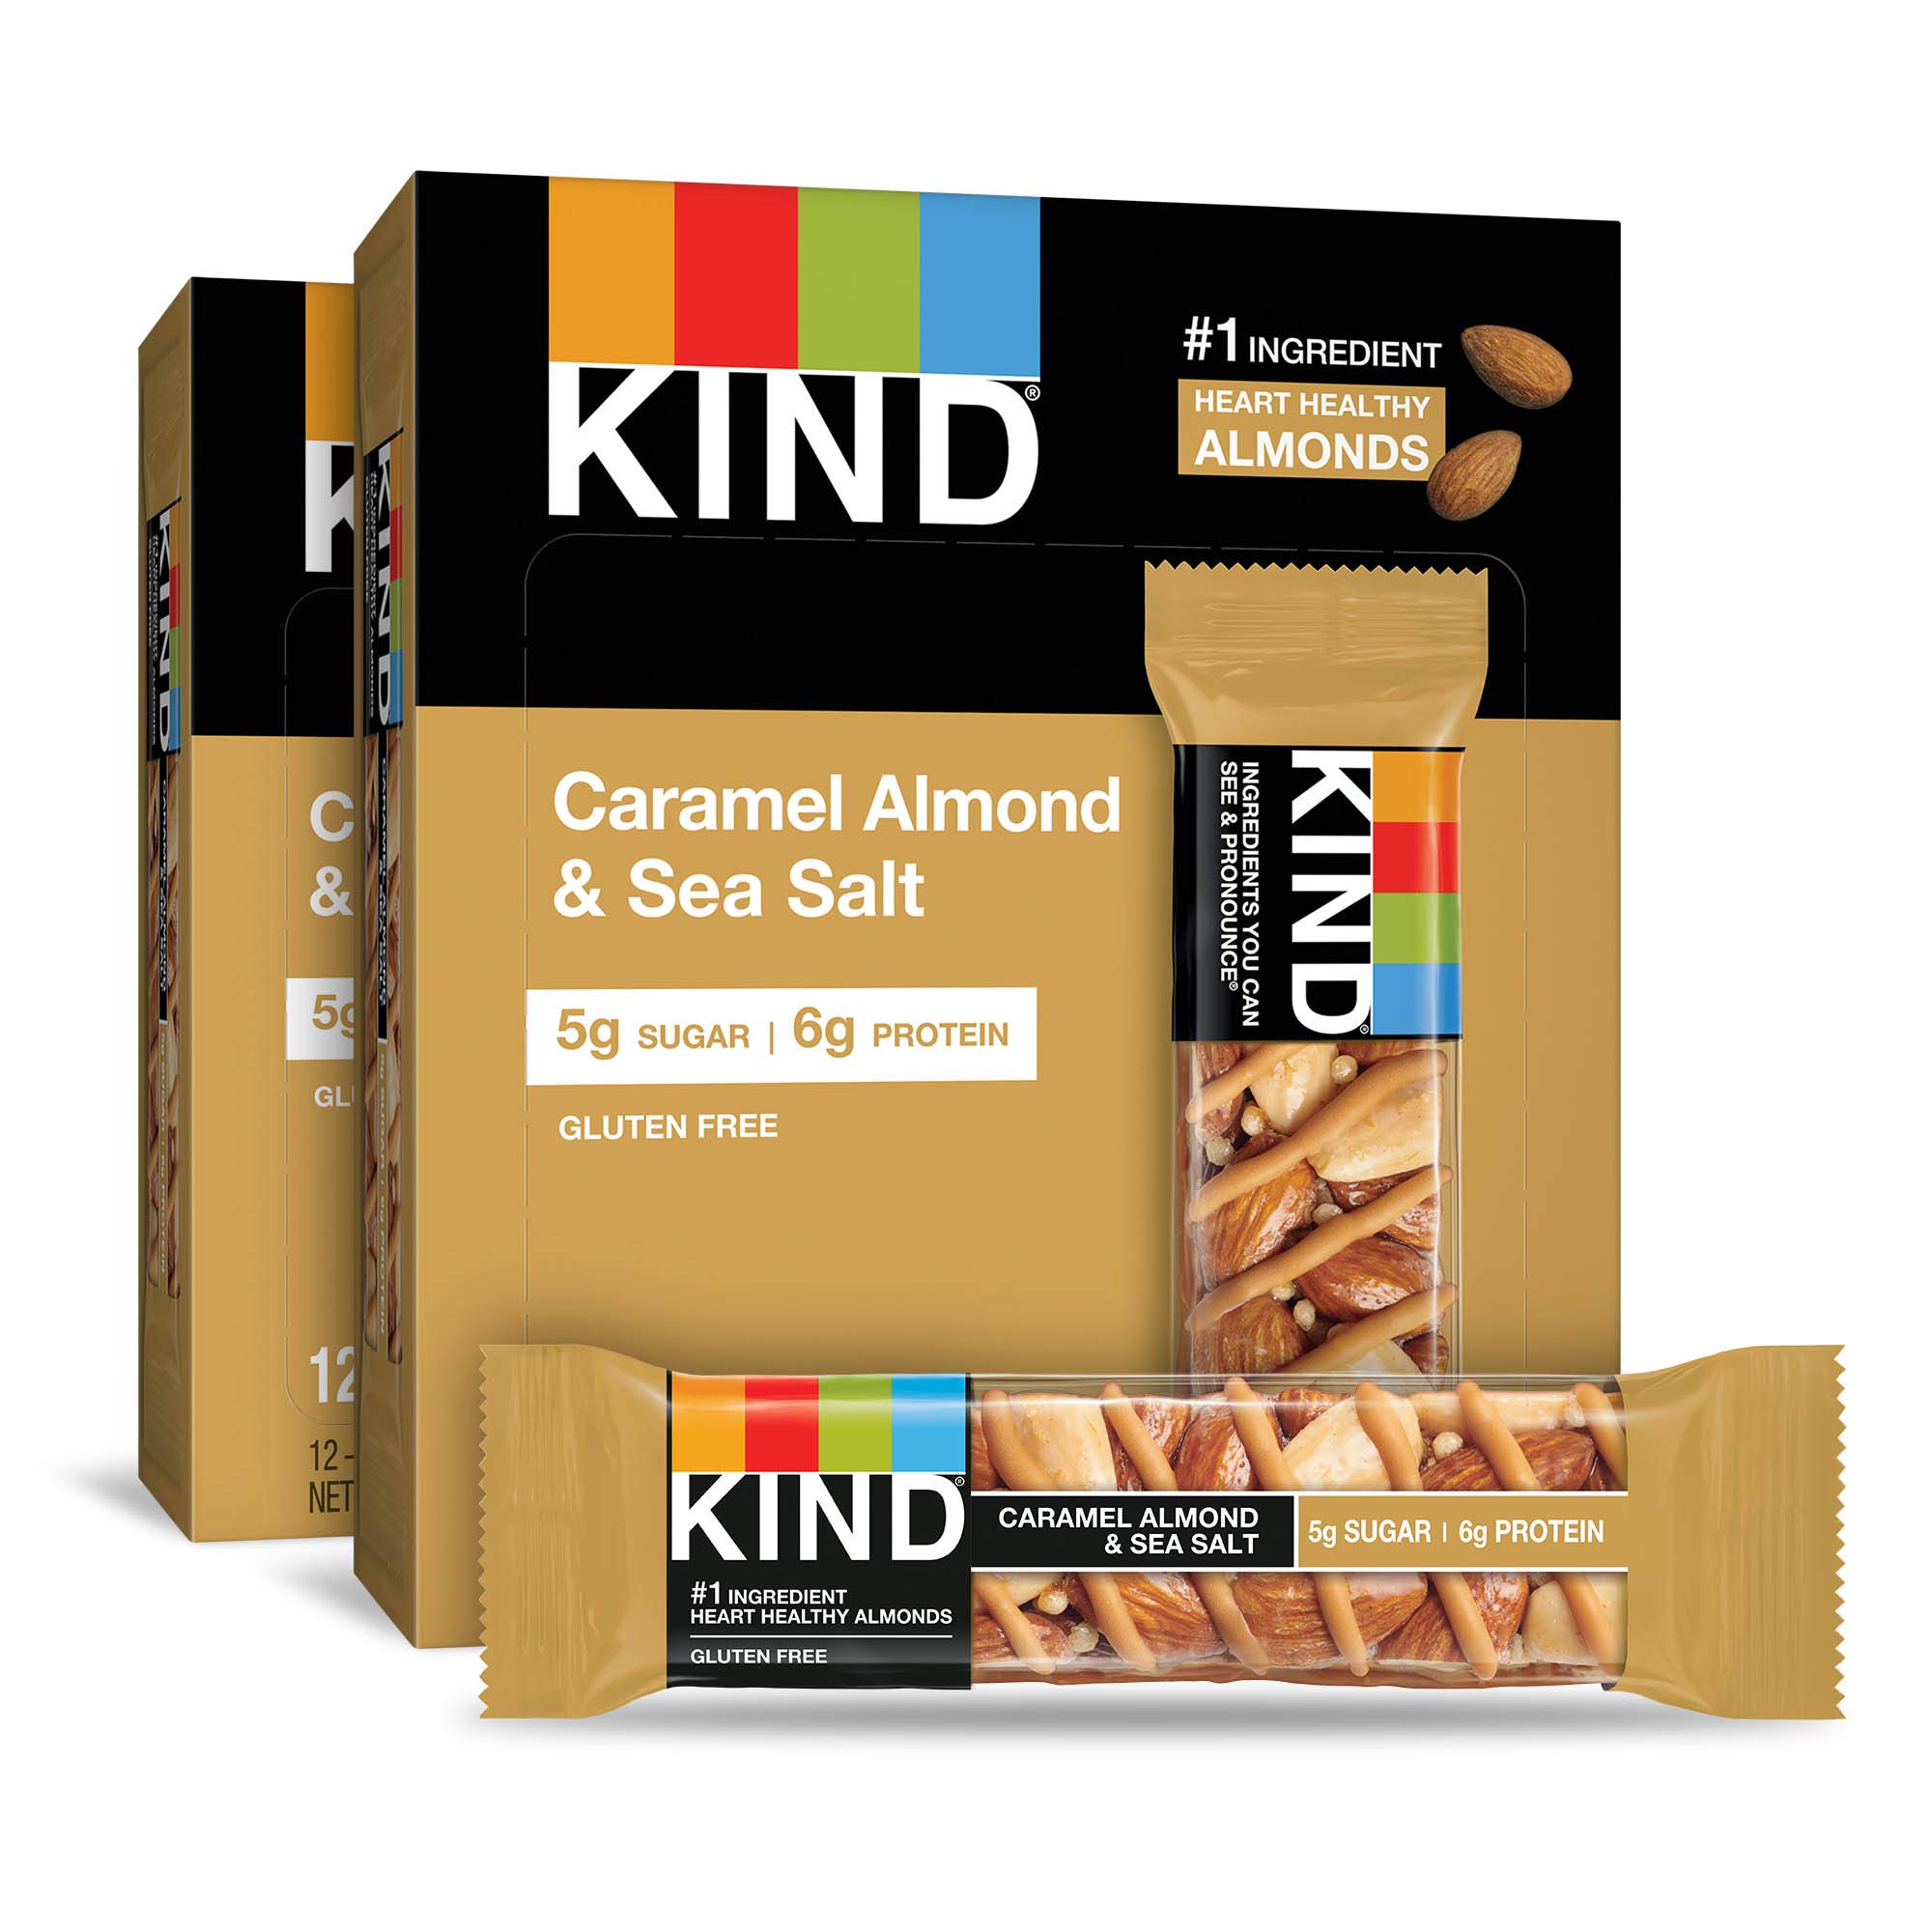 KIND Nut Bars, Caramel Almond and Sea Salt, 1.4 Ounce, 24 Count, Gluten Free, 5g Sugar, 6g Protein - $12.74 at Amazon Warehouse